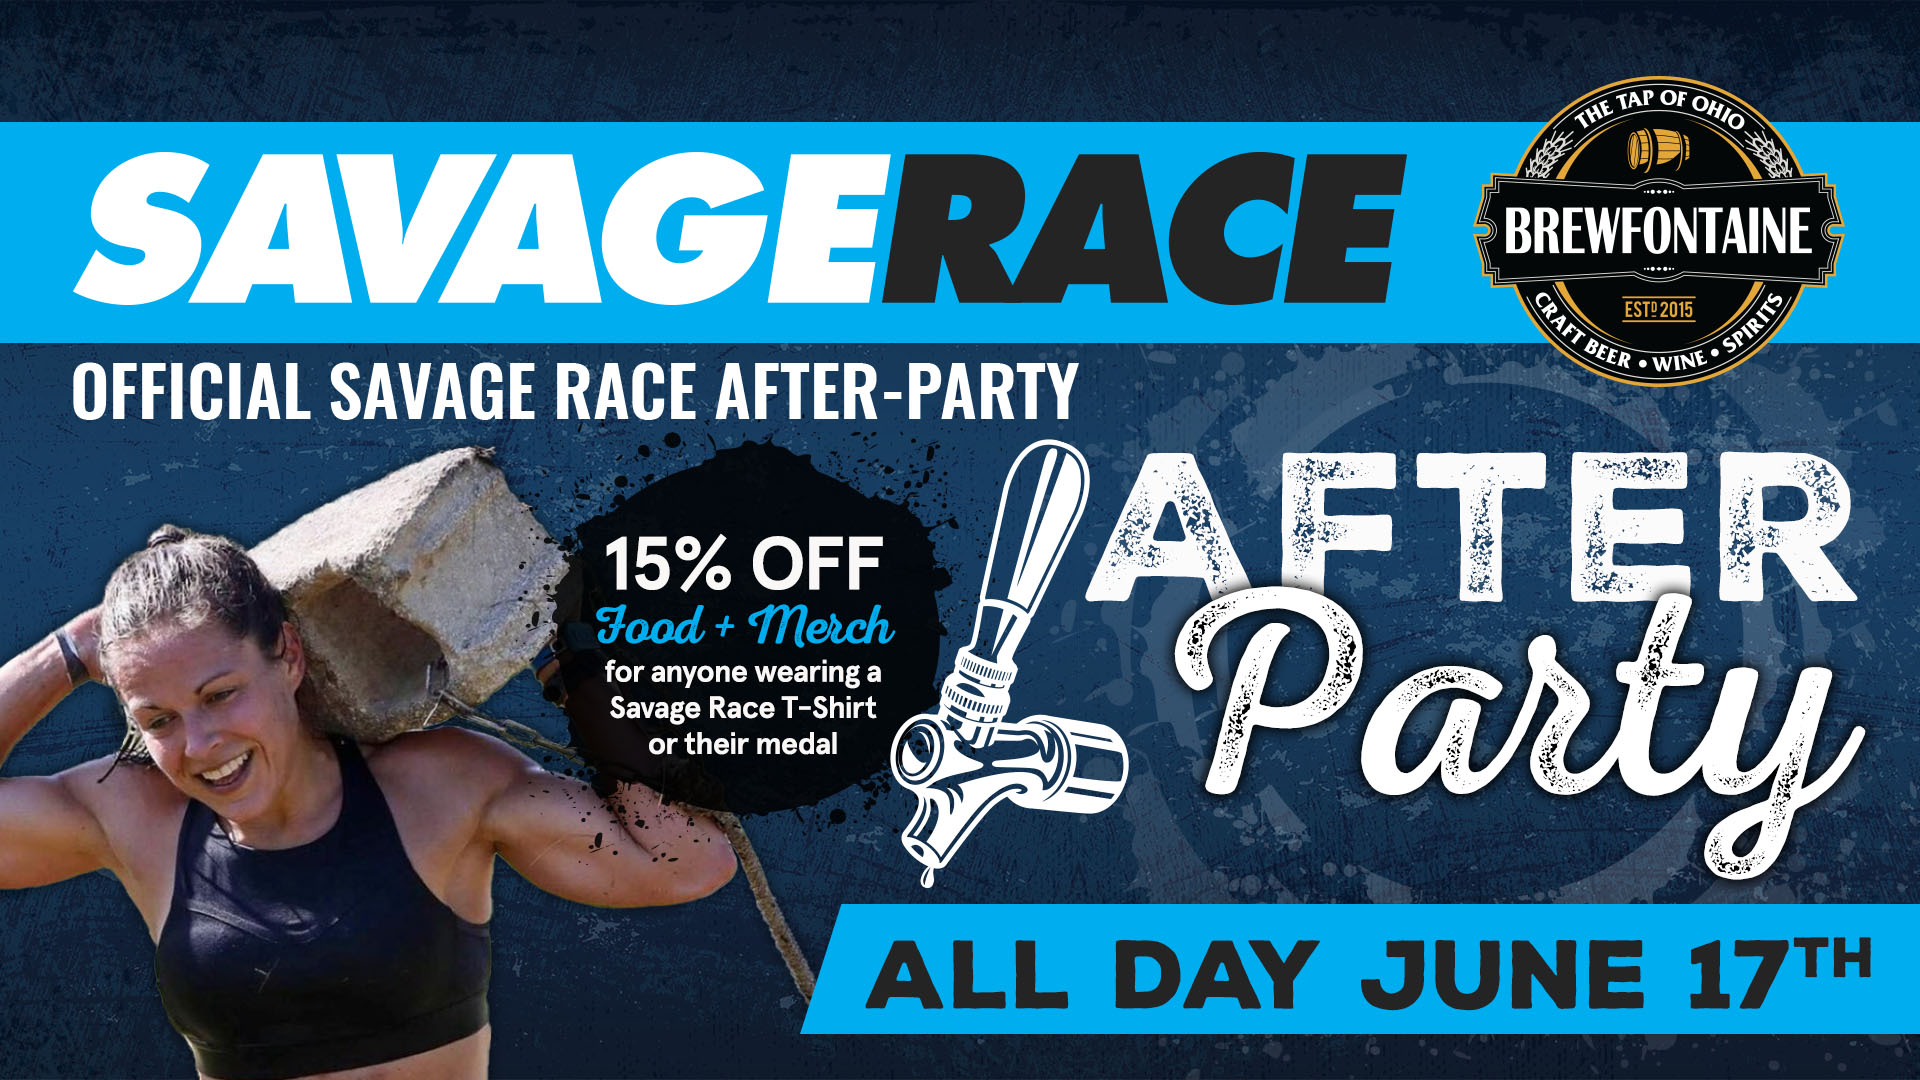 Official Savage Race After-Party!